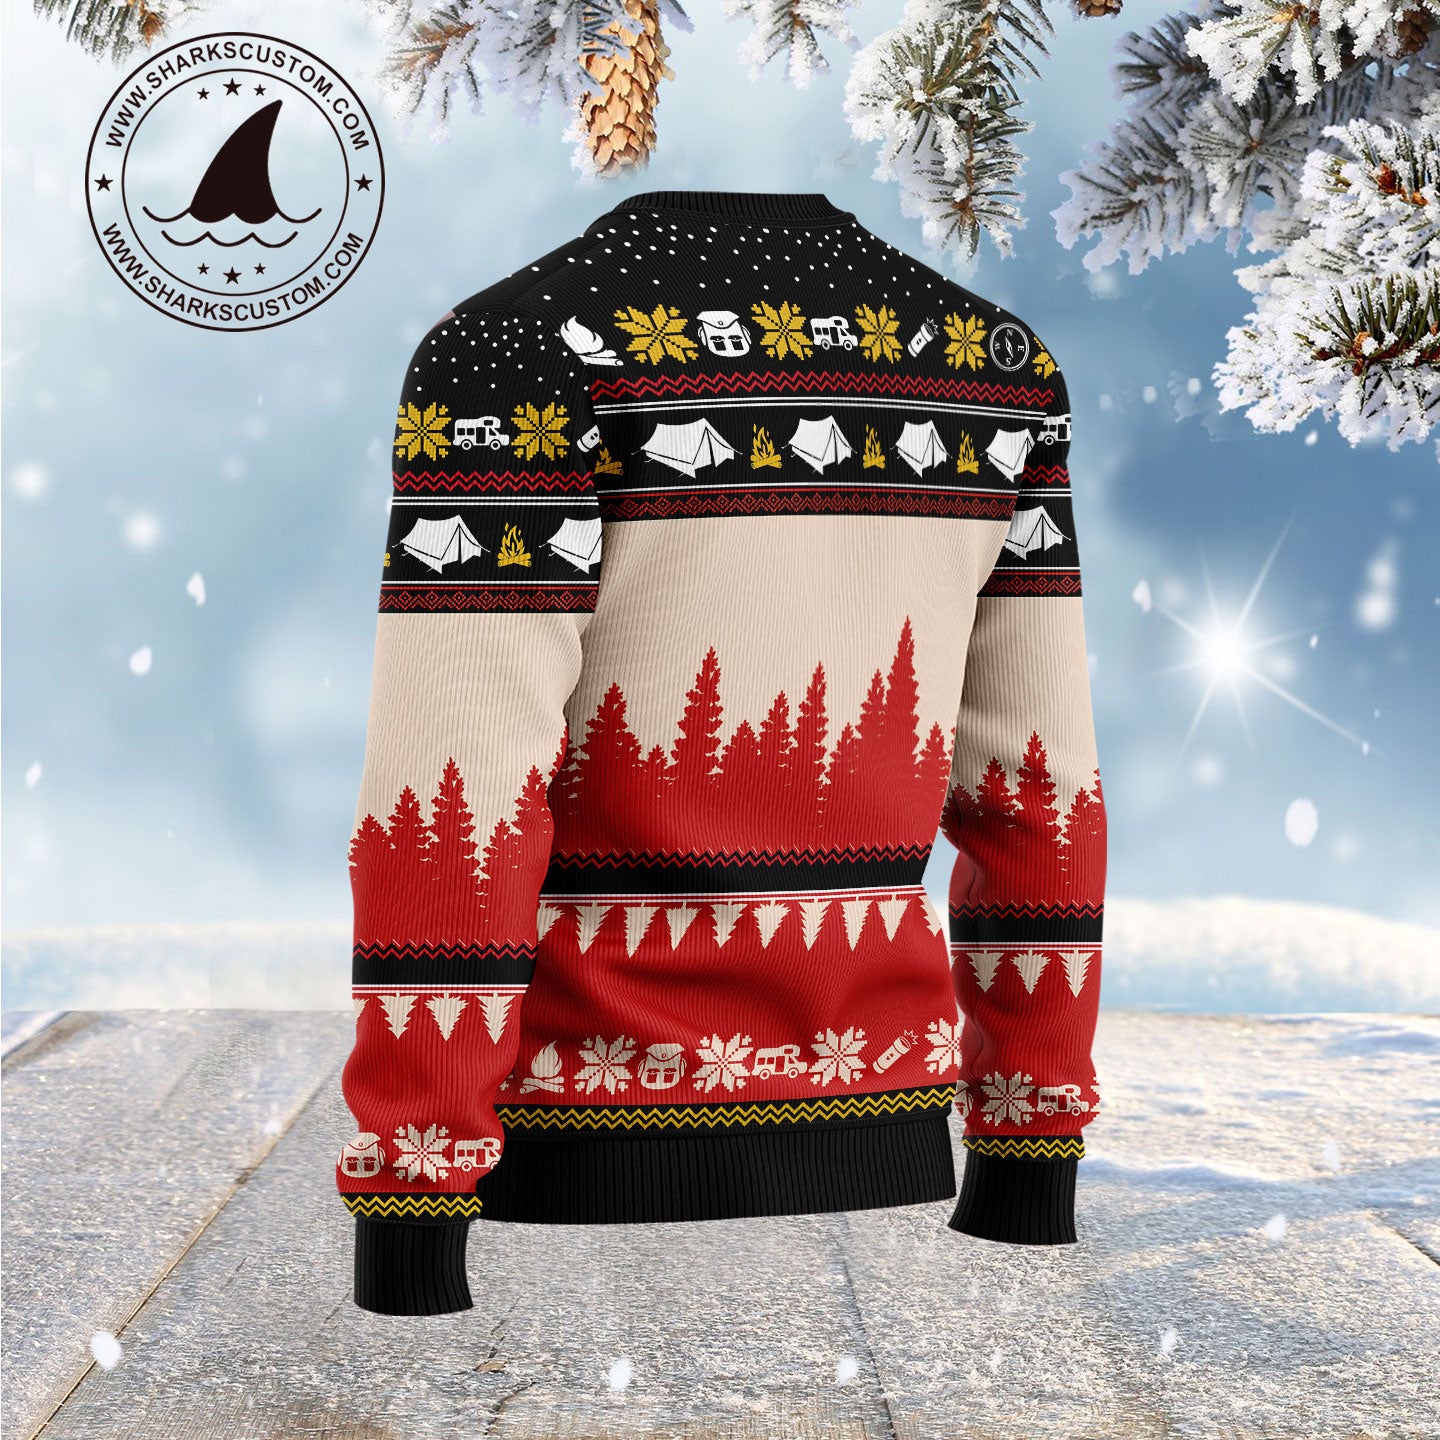 All I Want For Christmas Is More Time For Camping G5115 Ugly Christmas Sweater